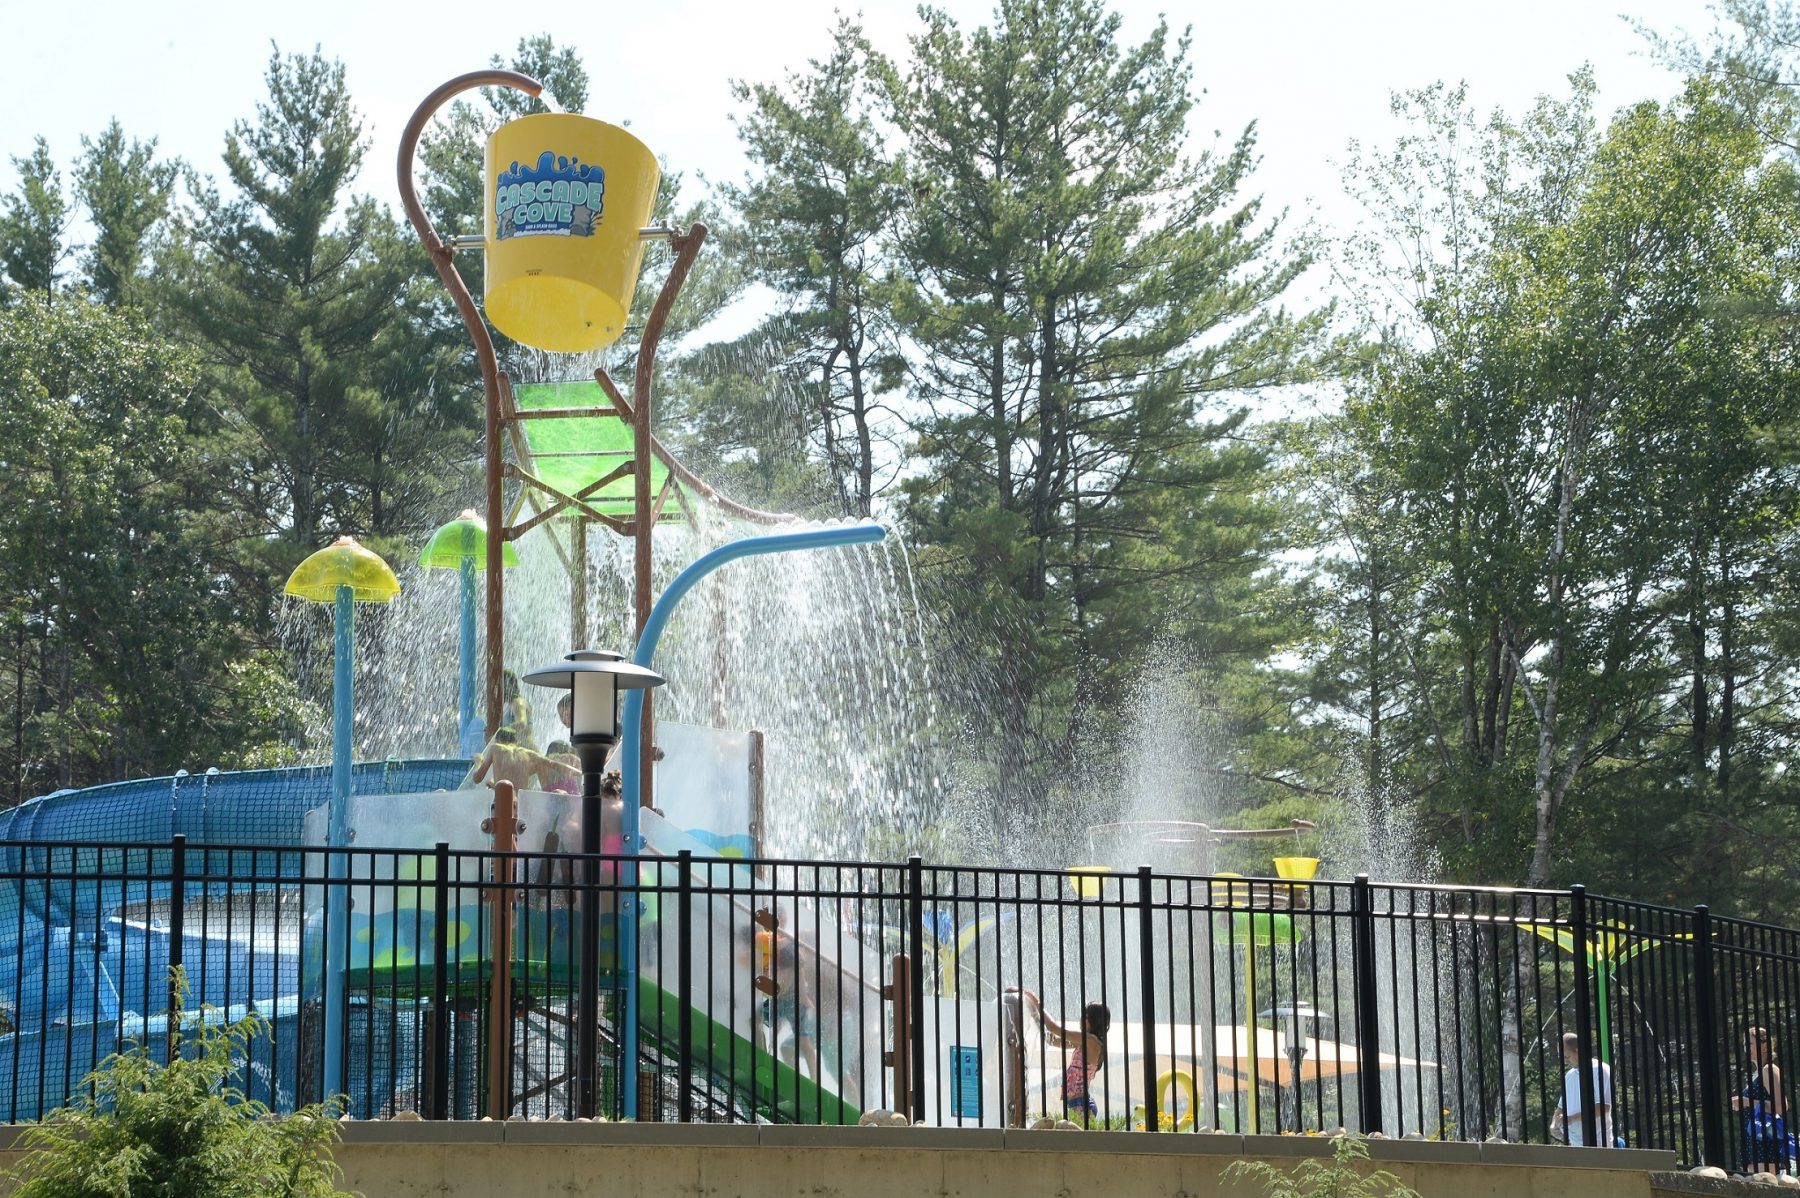 Splash pad with blue twisting slide, spray features, large yellow dump bucket, multiple children climbing steps up to slide, surrounded by black fence